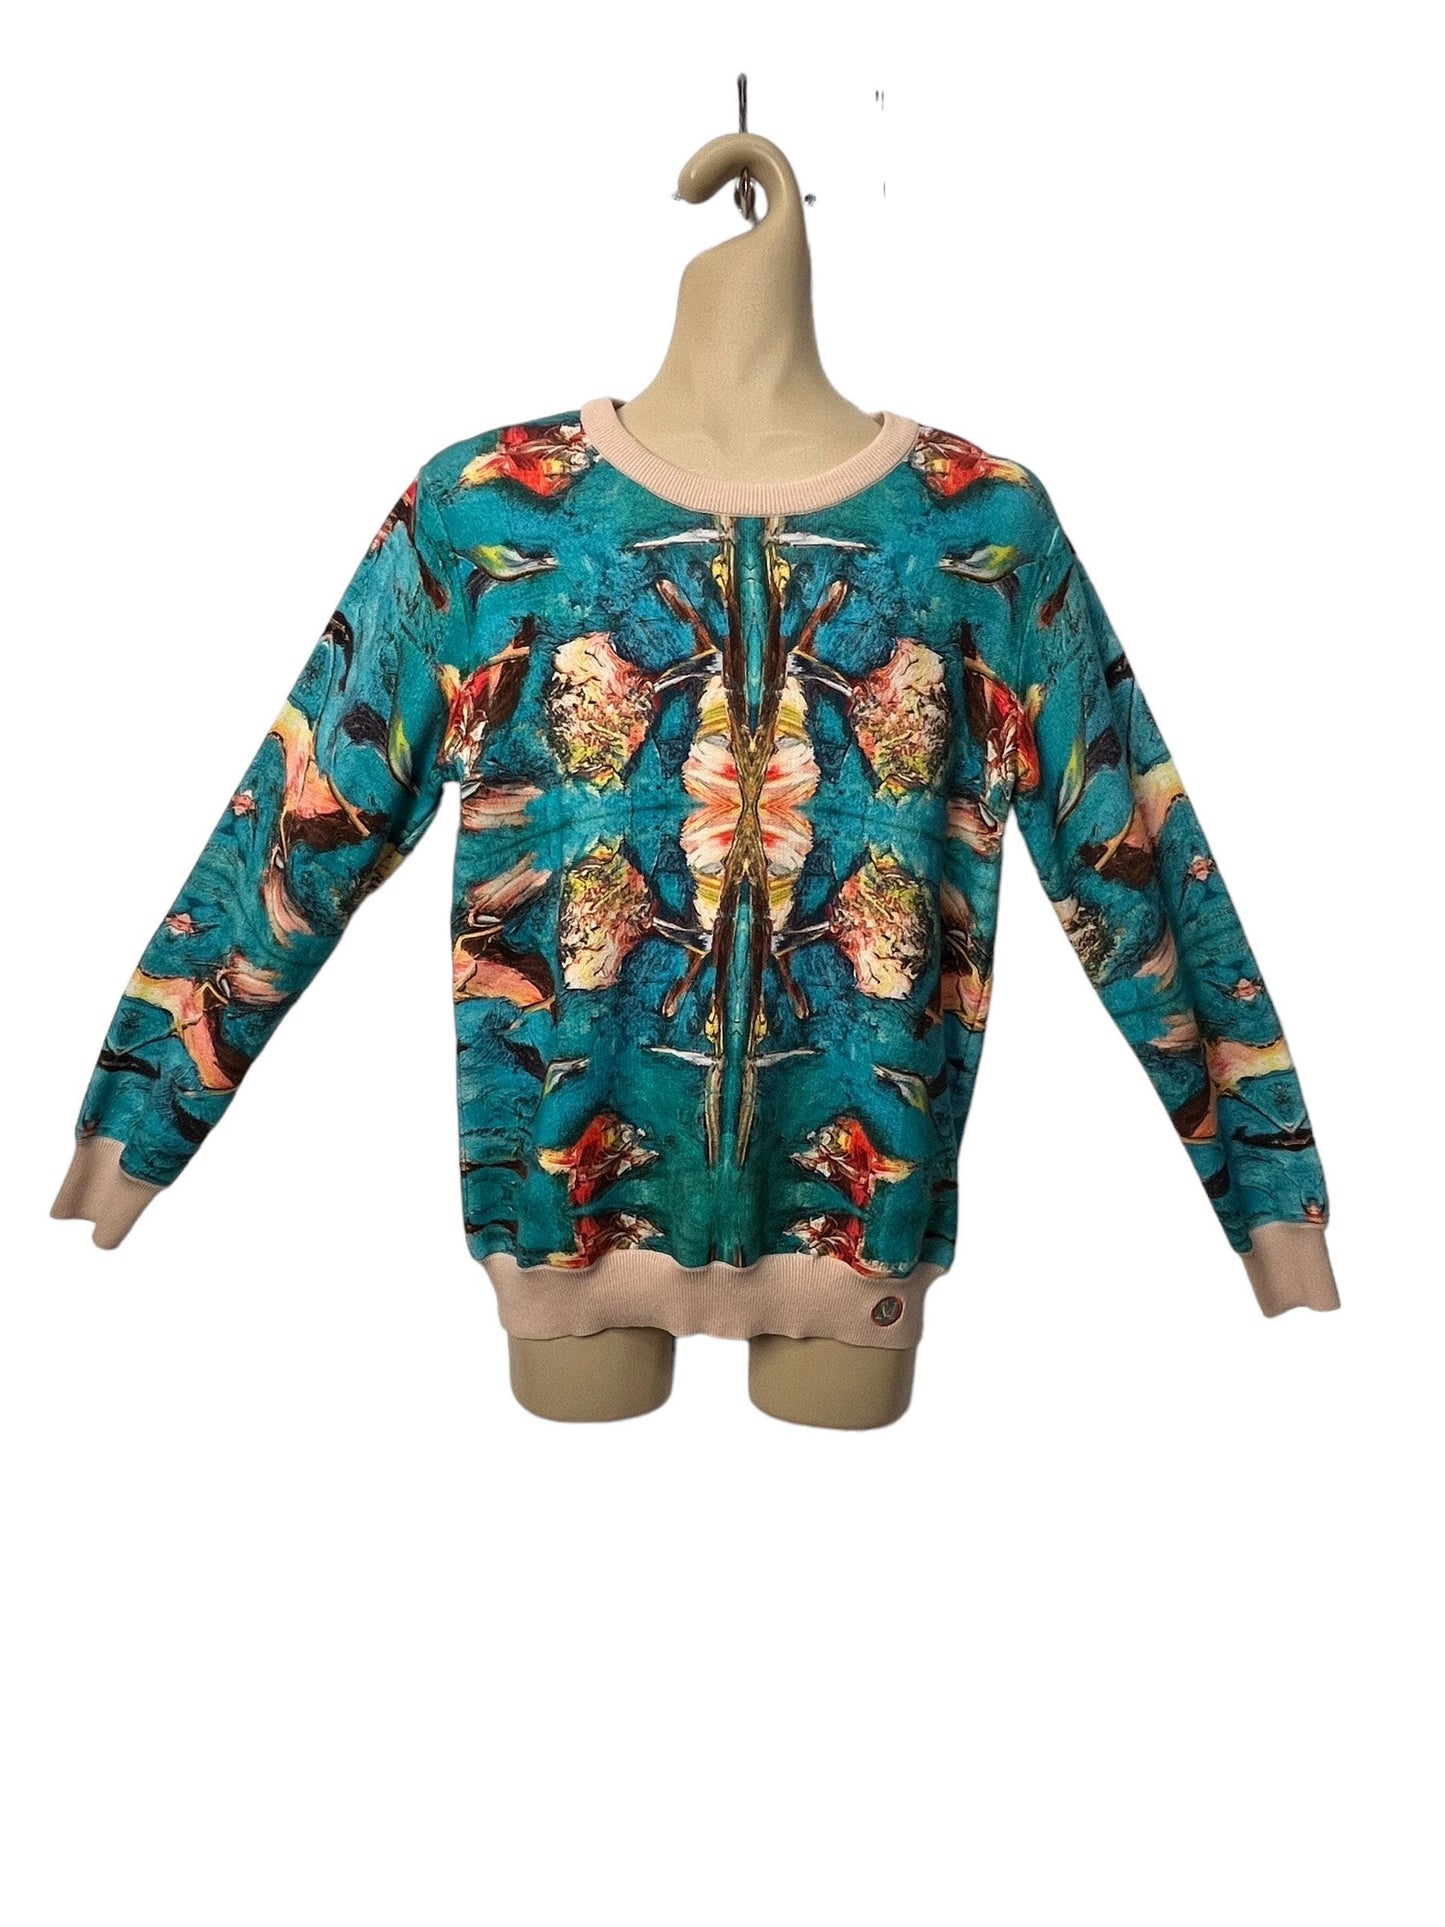 The Birds Pima Cotton sweater by Bruce Mishell